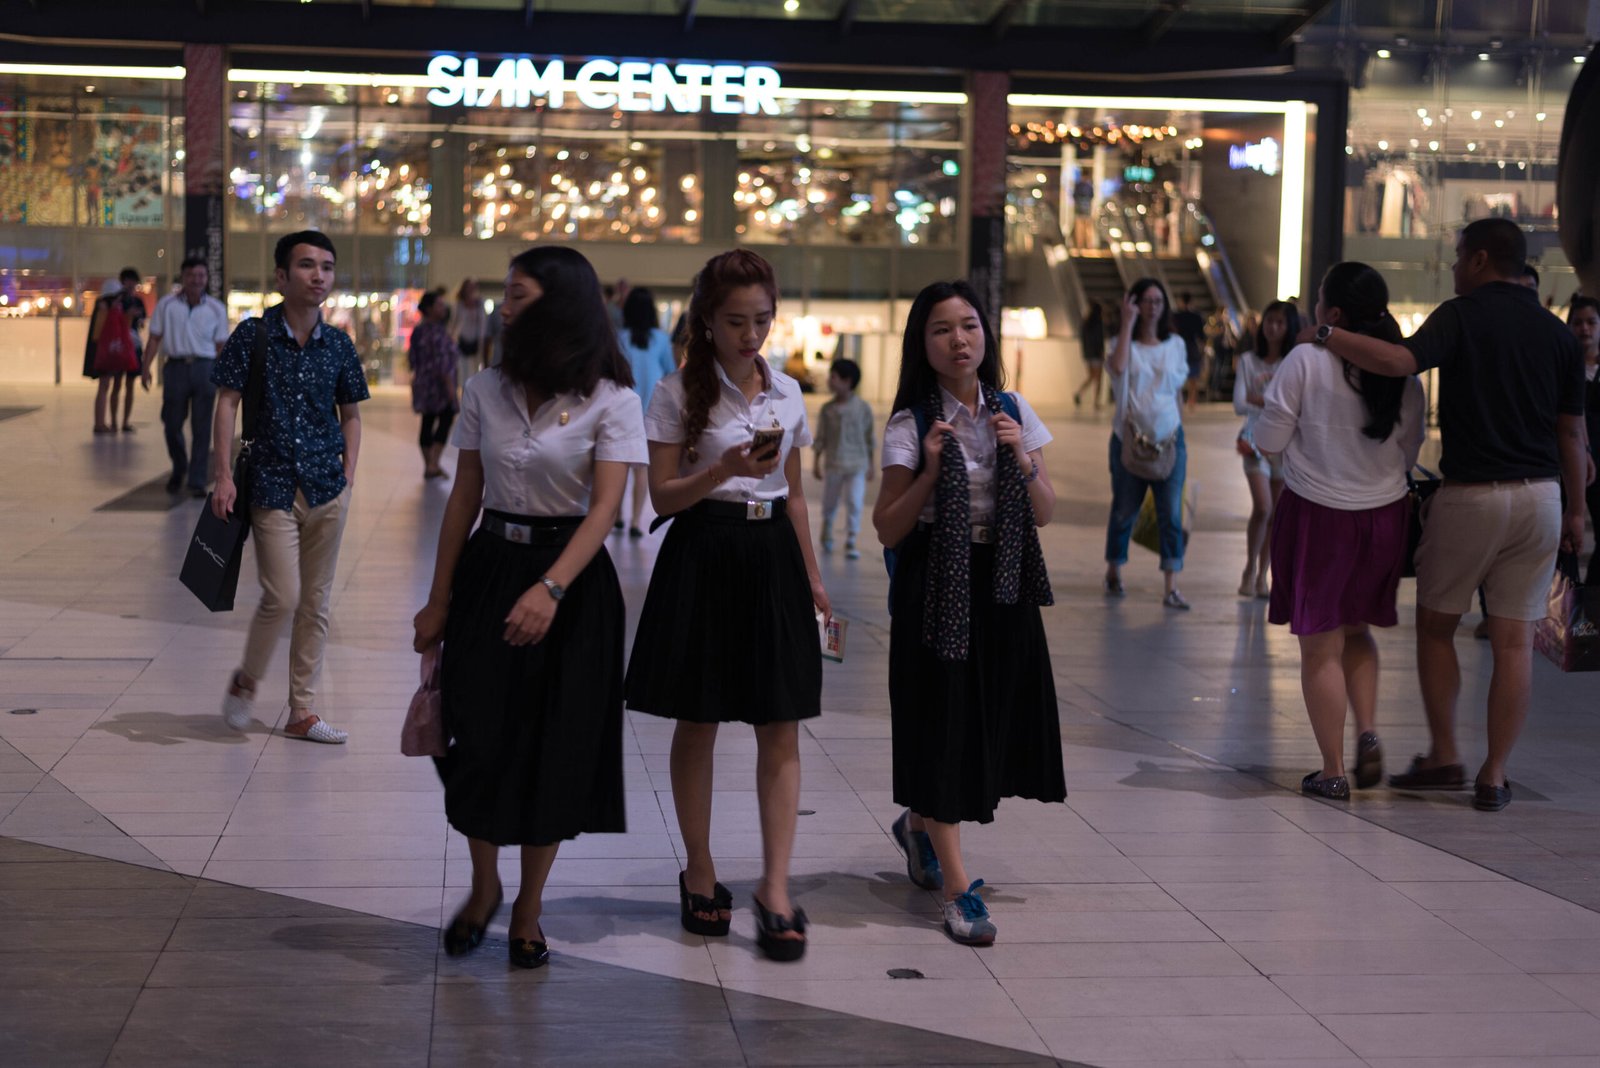 Students at Siam